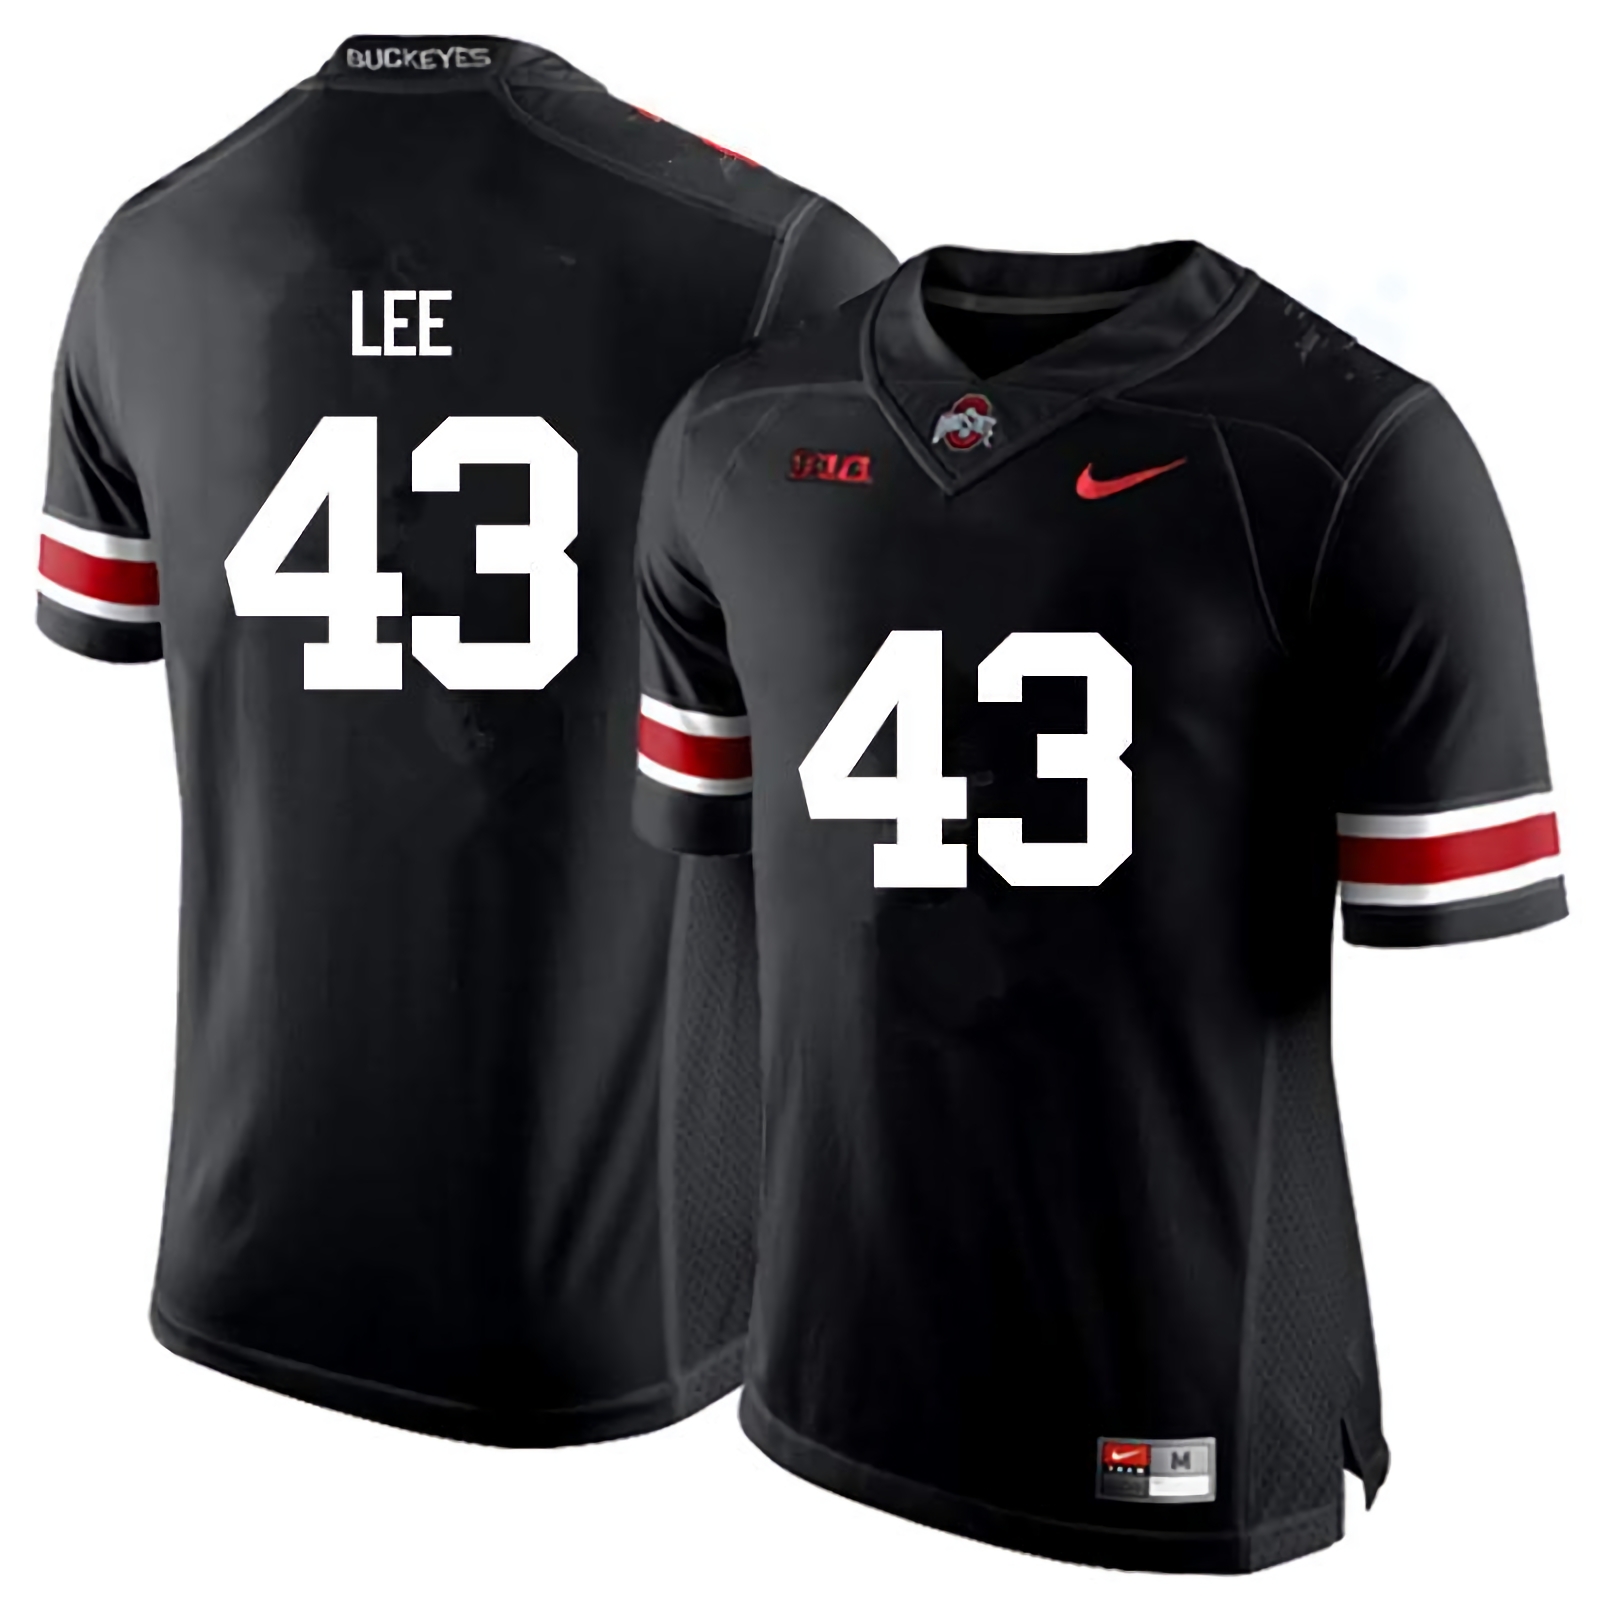 Darron Lee Ohio State Buckeyes Men's NCAA #43 Nike Black College Stitched Football Jersey RSH5256HH